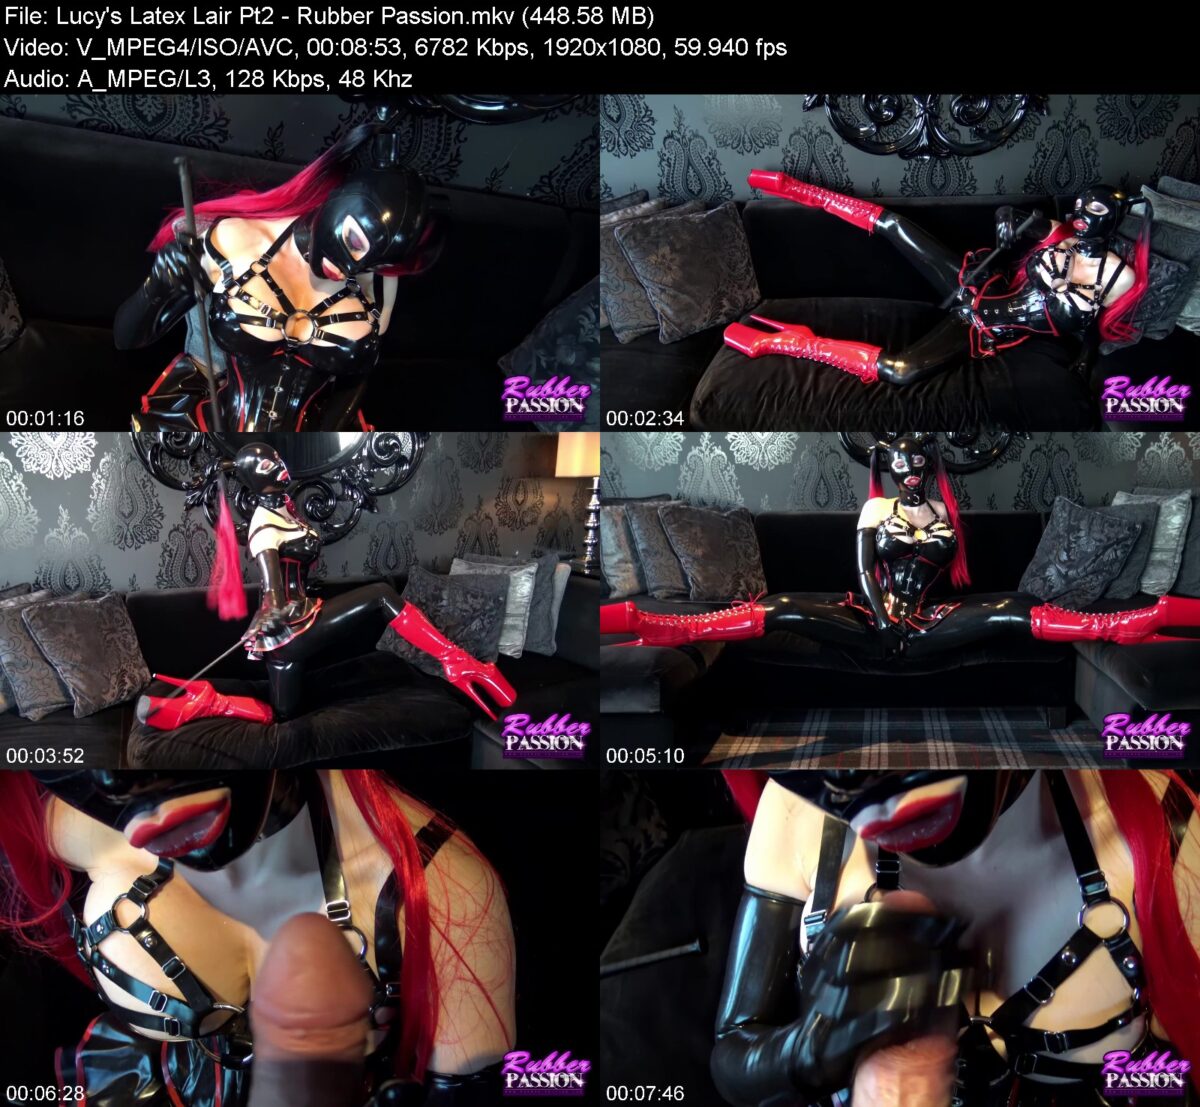 Actress: Lucy’s Latex Lair Pt2. Title and Studio: Rubber Passion